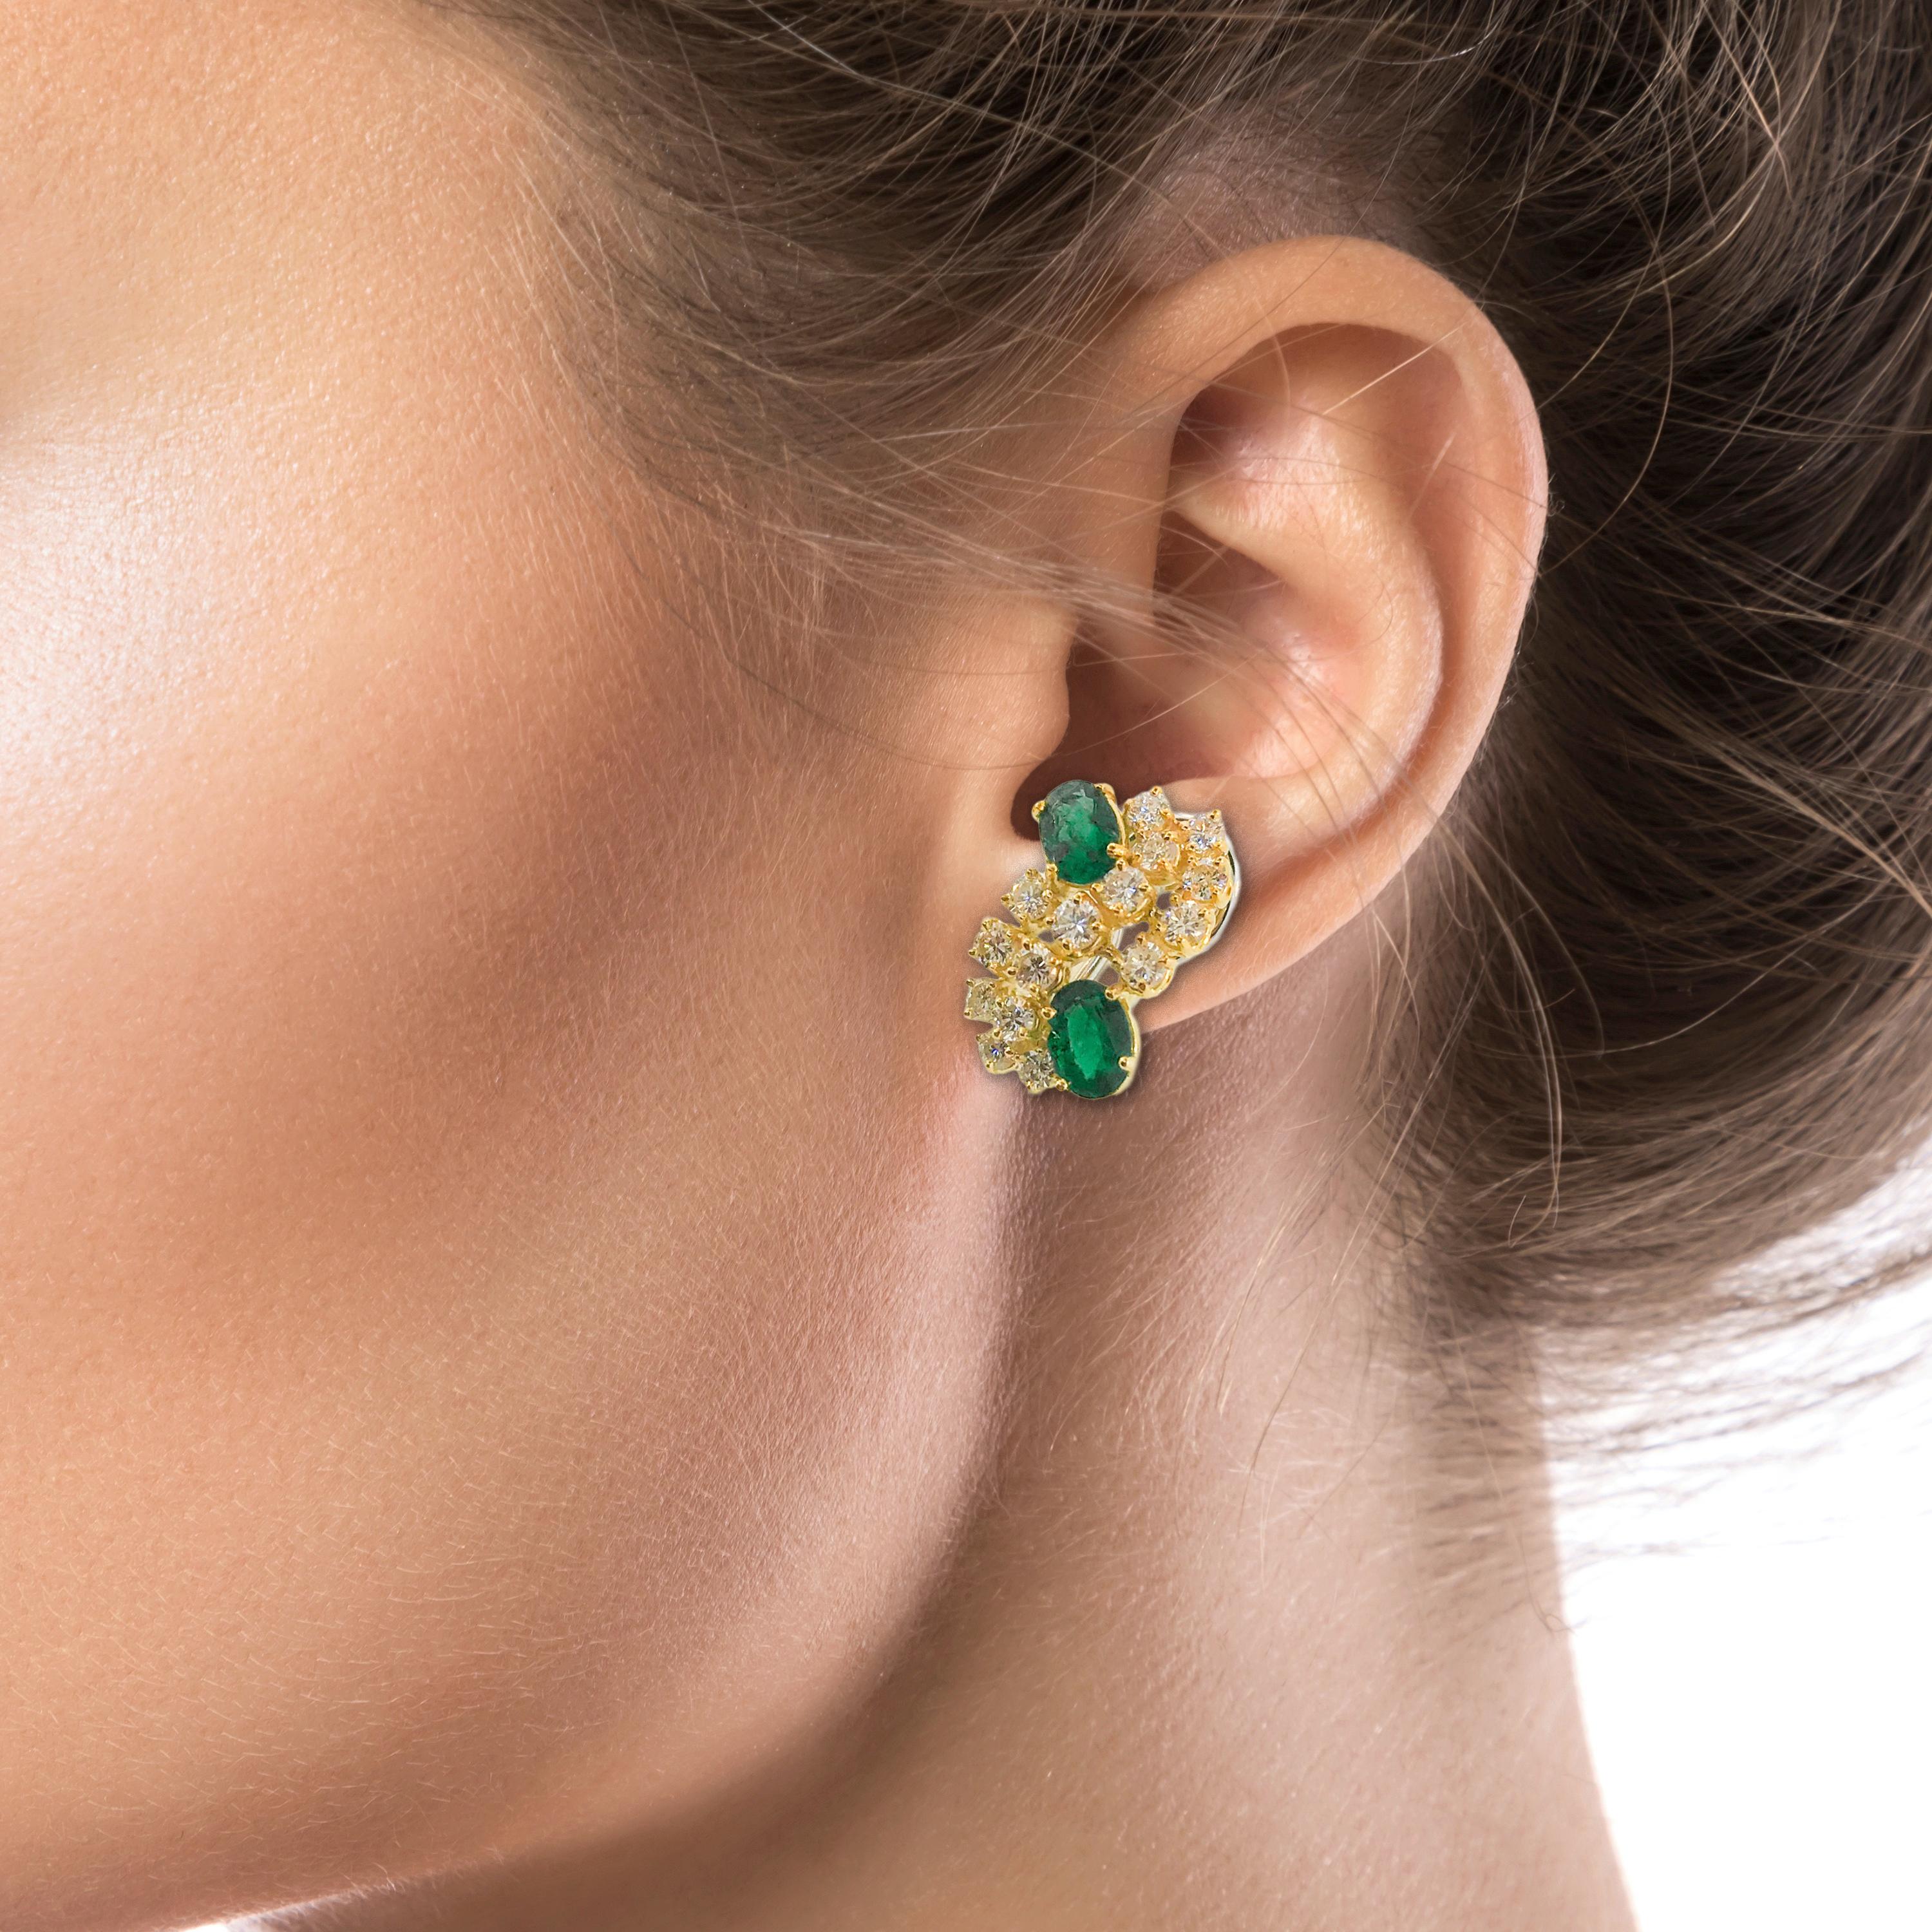 The 18K Yellow Gold Emerald and Diamond Earrings are of a cluster 